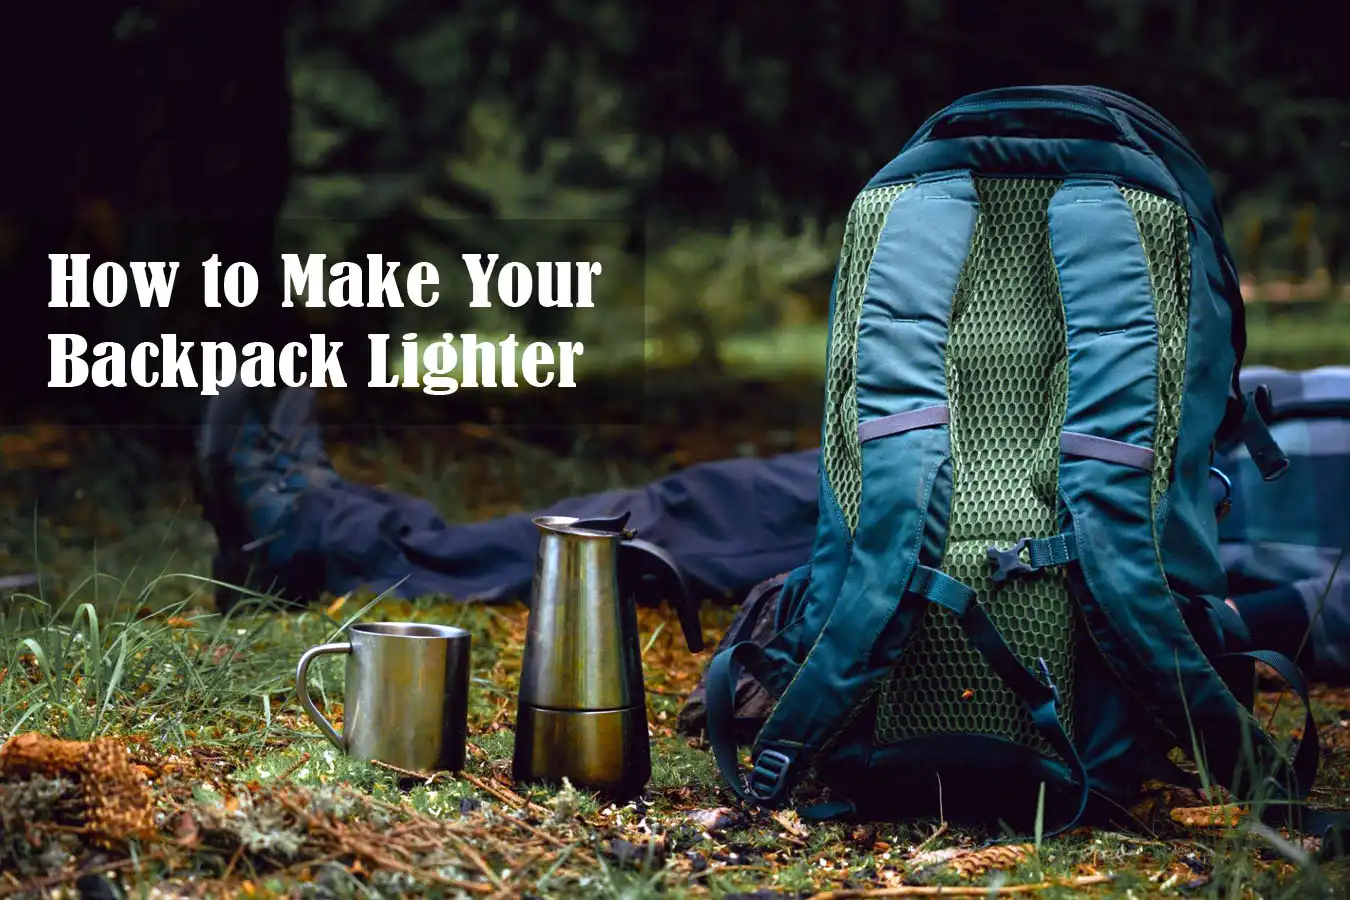 How to Make Your Backpack Lighter